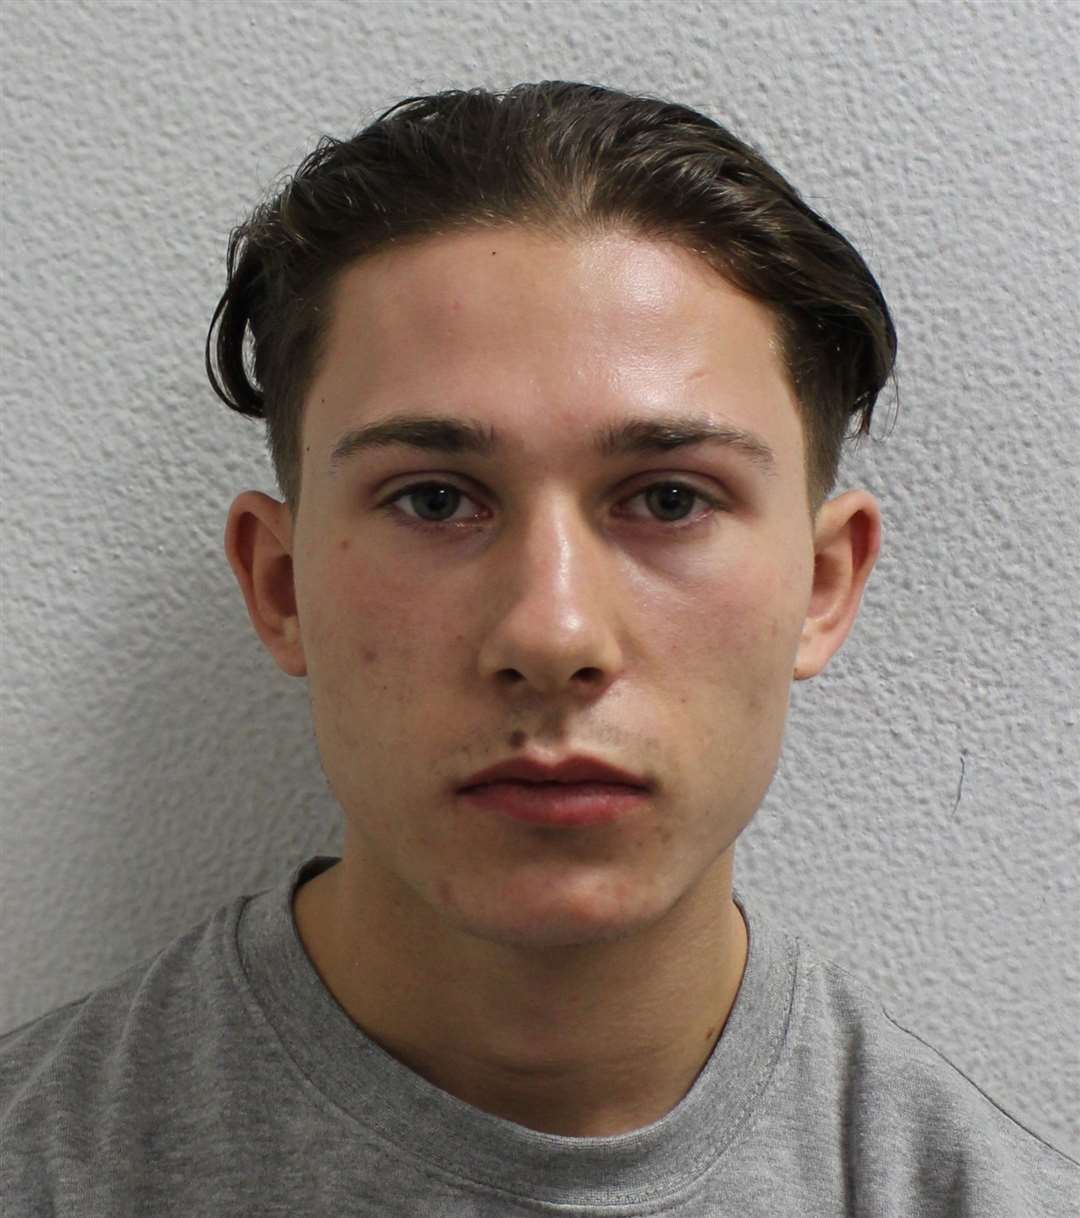 James Biscoe, from Dartford, pleaded guilty to death by dangerous driving. Photo: Metropolitan Police